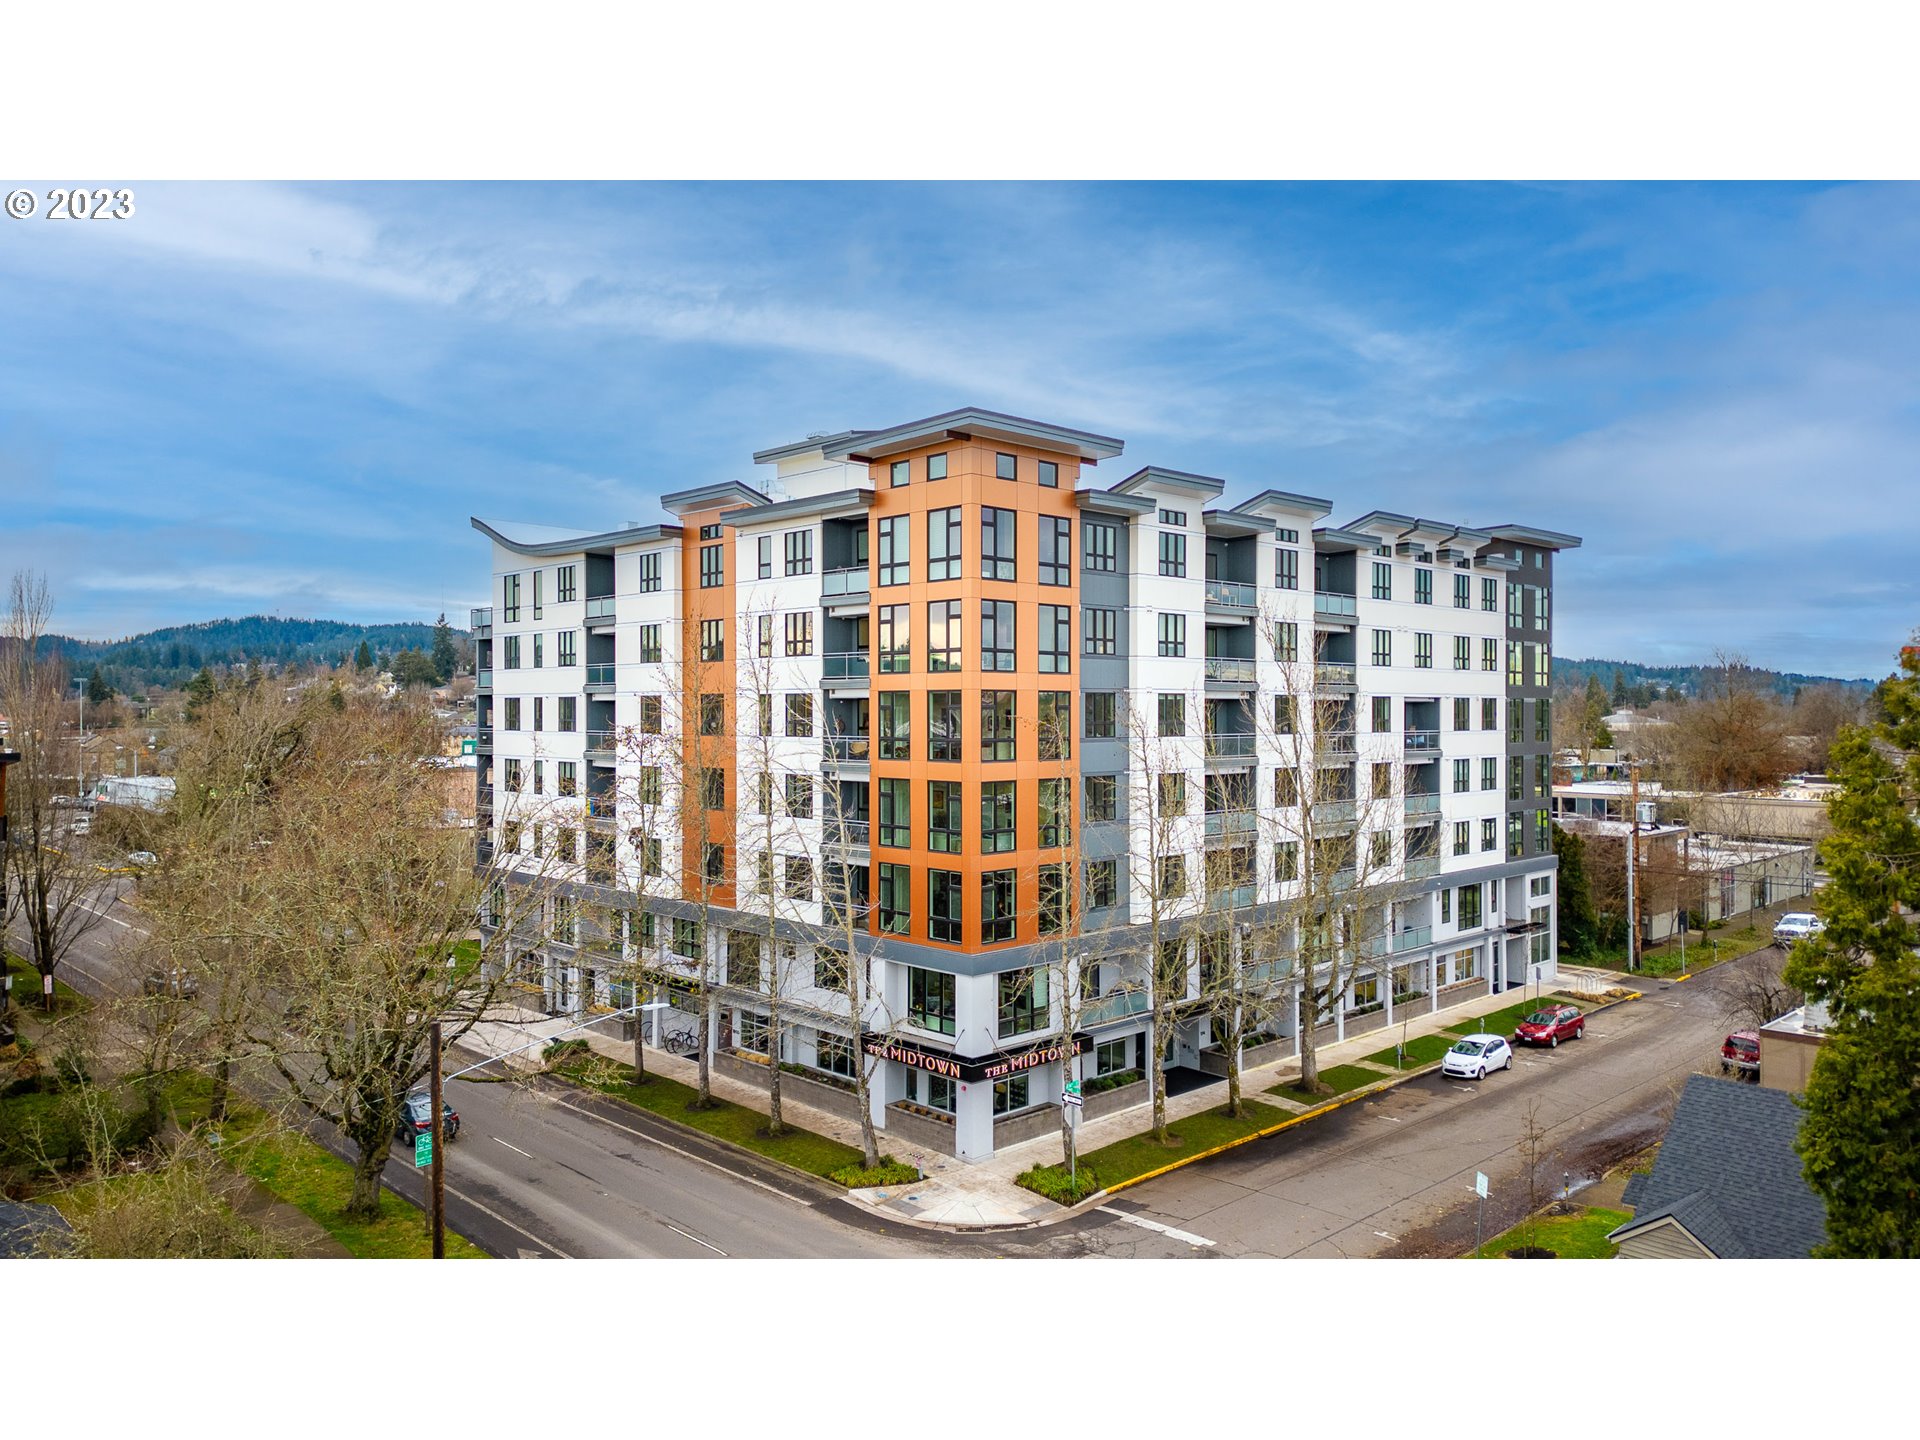 Rare opportunity to own one of the most luxurious condos to ever hit the market in Eugene. Walking distance to Downtown and the University of Oregon, Unit 603 is a corner unit featuring floor to ceiling windows with both north & east views. Enjoy watching the sunrise from your private patio and wall of windows. 603 features hardwood floors, upgraded custom closets, superior appliances, and remote operated custom blinds throughout. The Midtown is fully secured and comes with deeded parking spot.